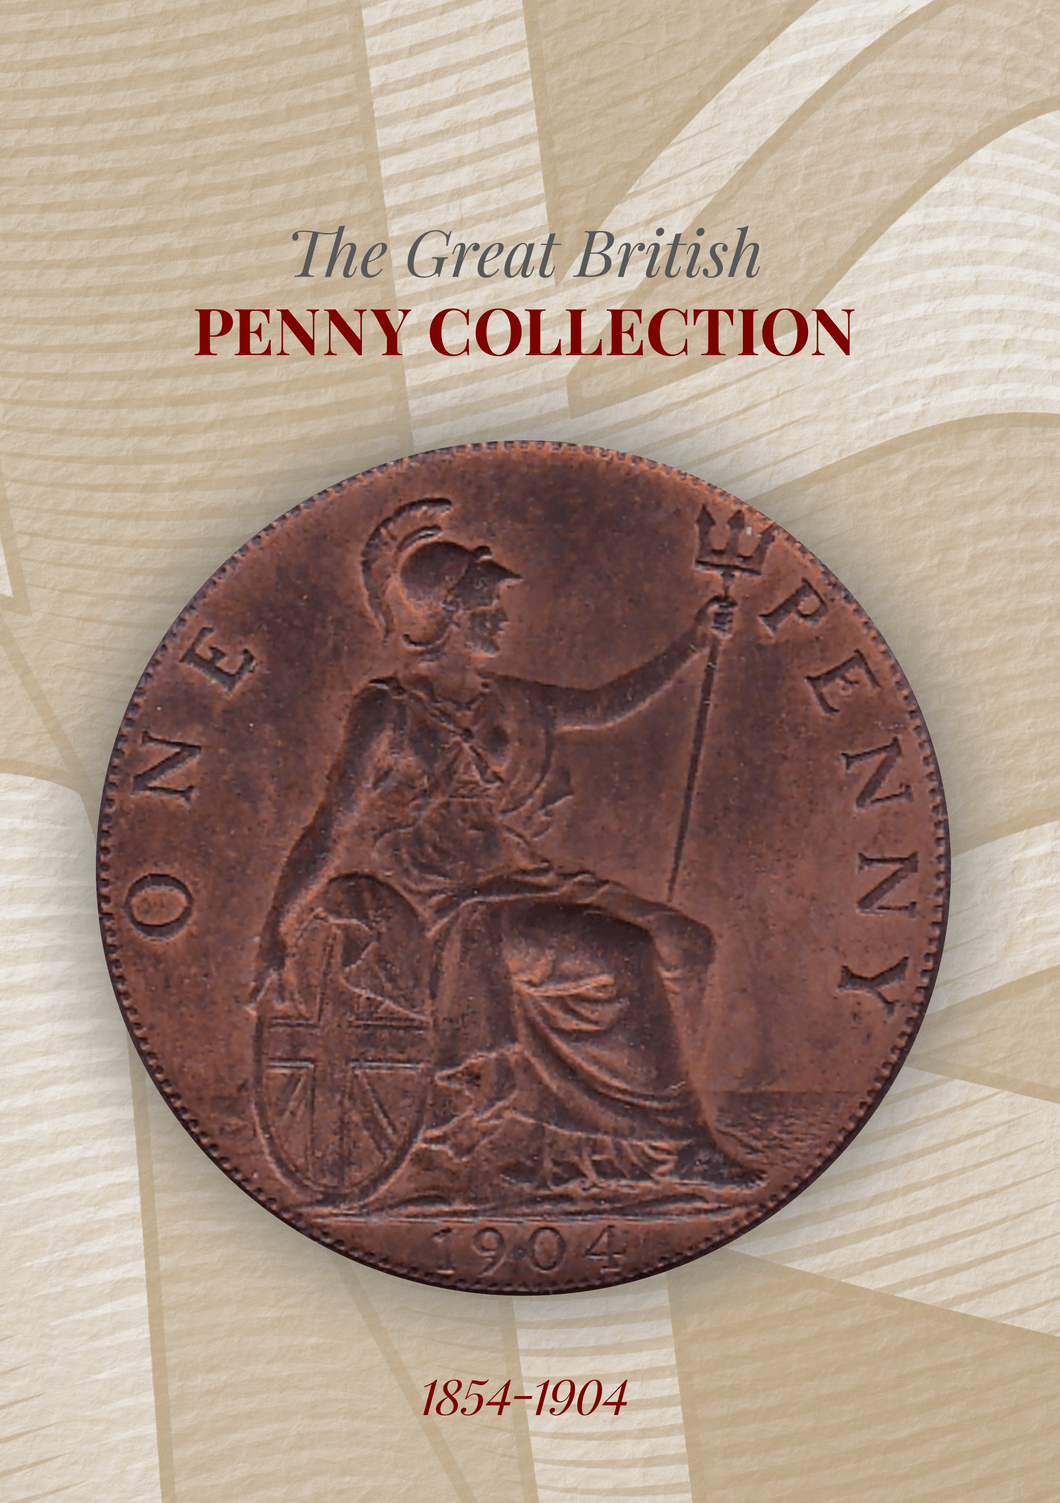 1854 - 1904 GREAT BRITISH PENNY COIN COLLECTION ALBUM STOCKING FILLER GIFT - Coin Album - Cambridgeshire Coins